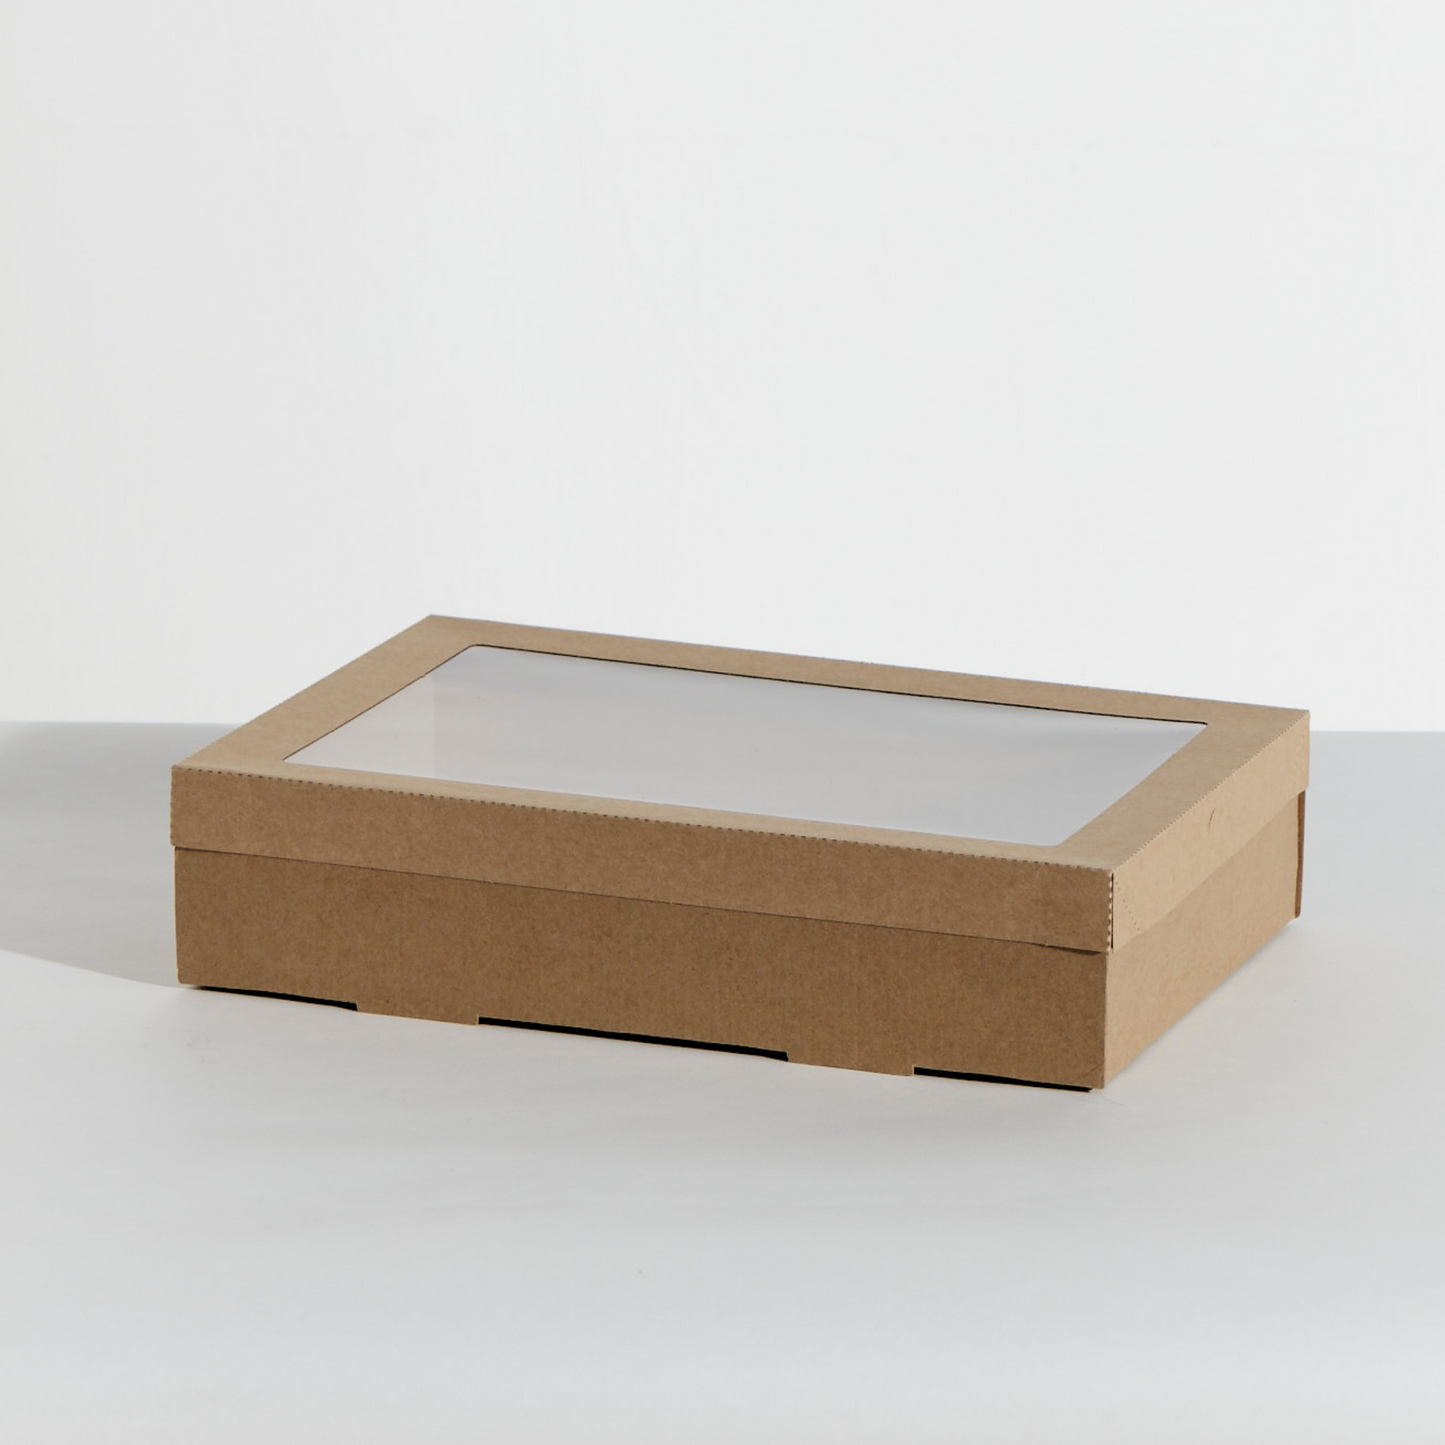 CATERING TRAY & LID 2 359 X 252 X 80MM (SOLD SEPARATELY)